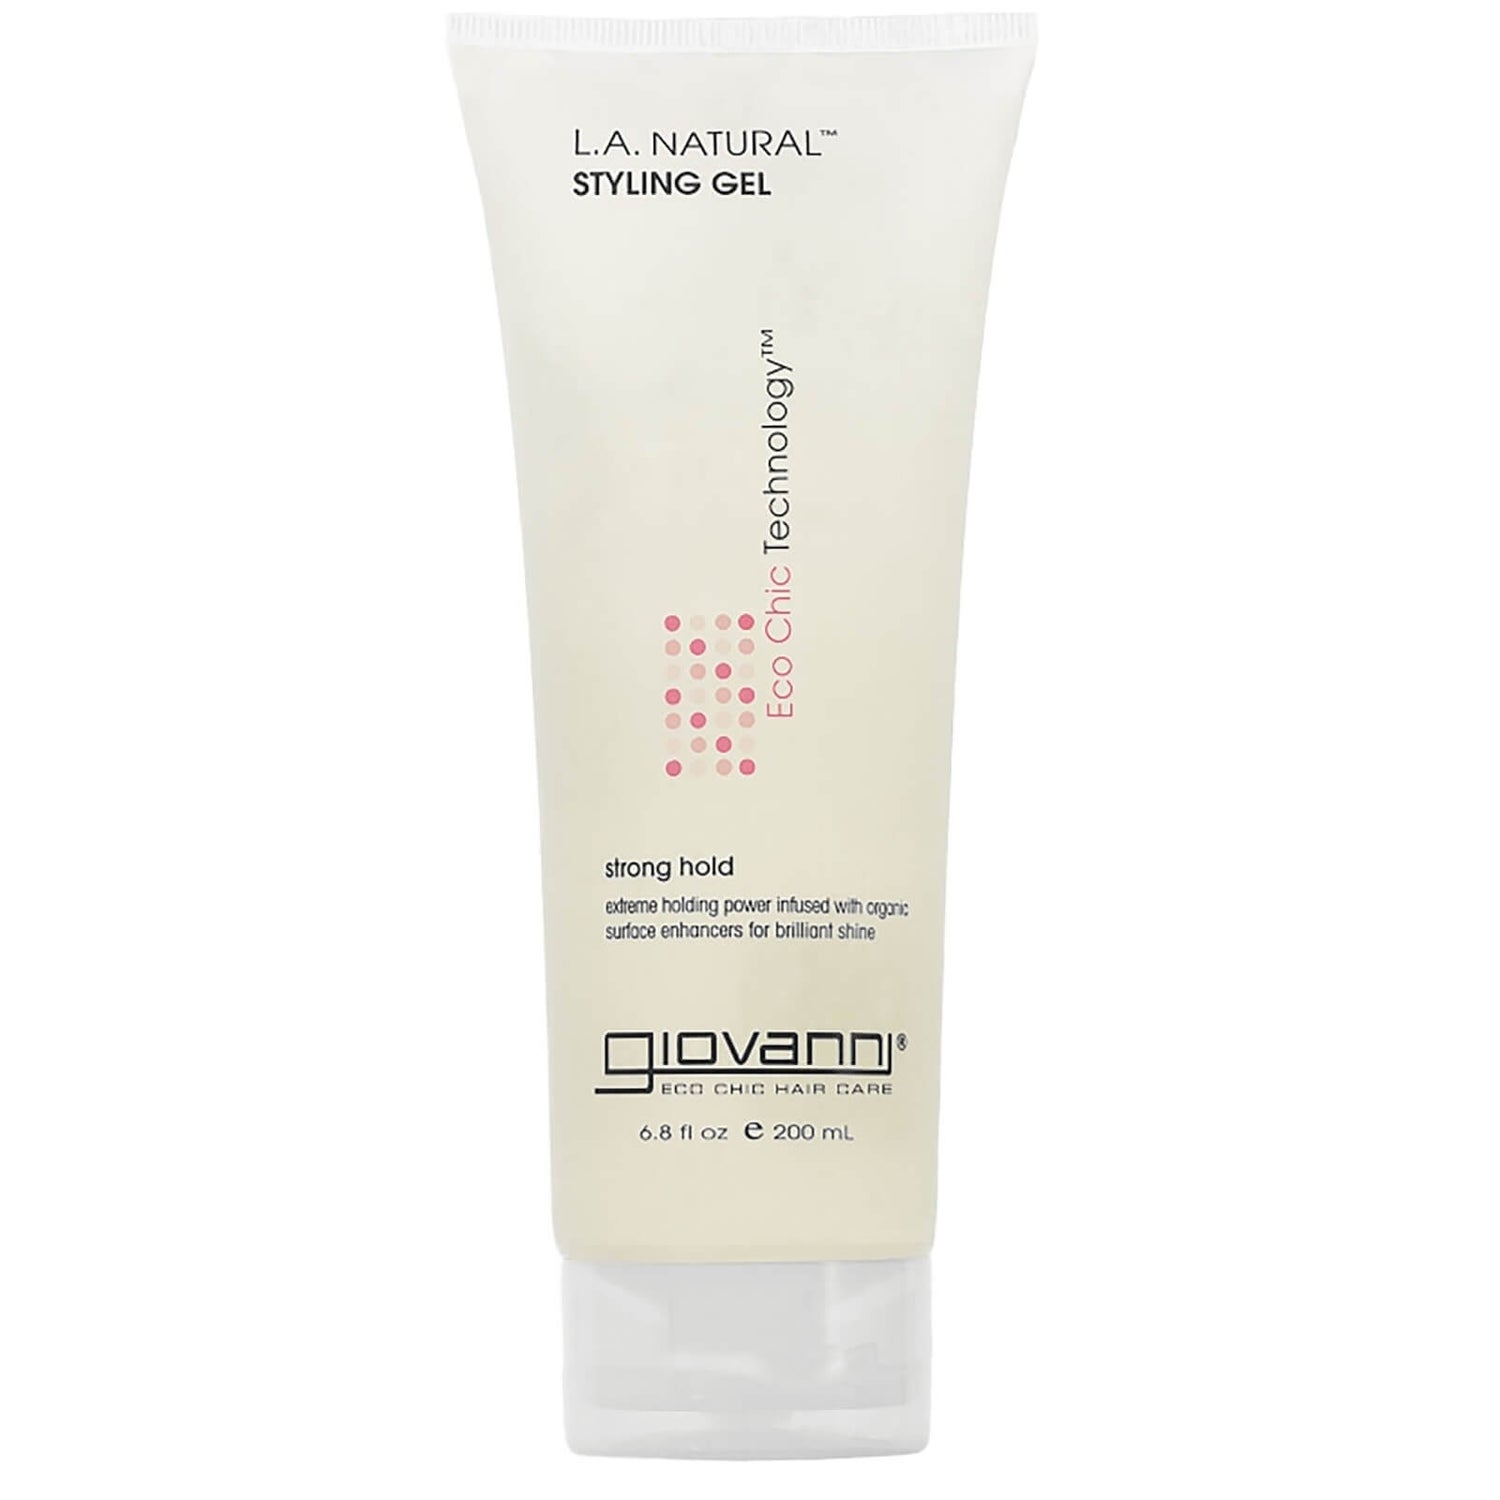 Giovanni L.A. Natural Styling Gel 60 ml